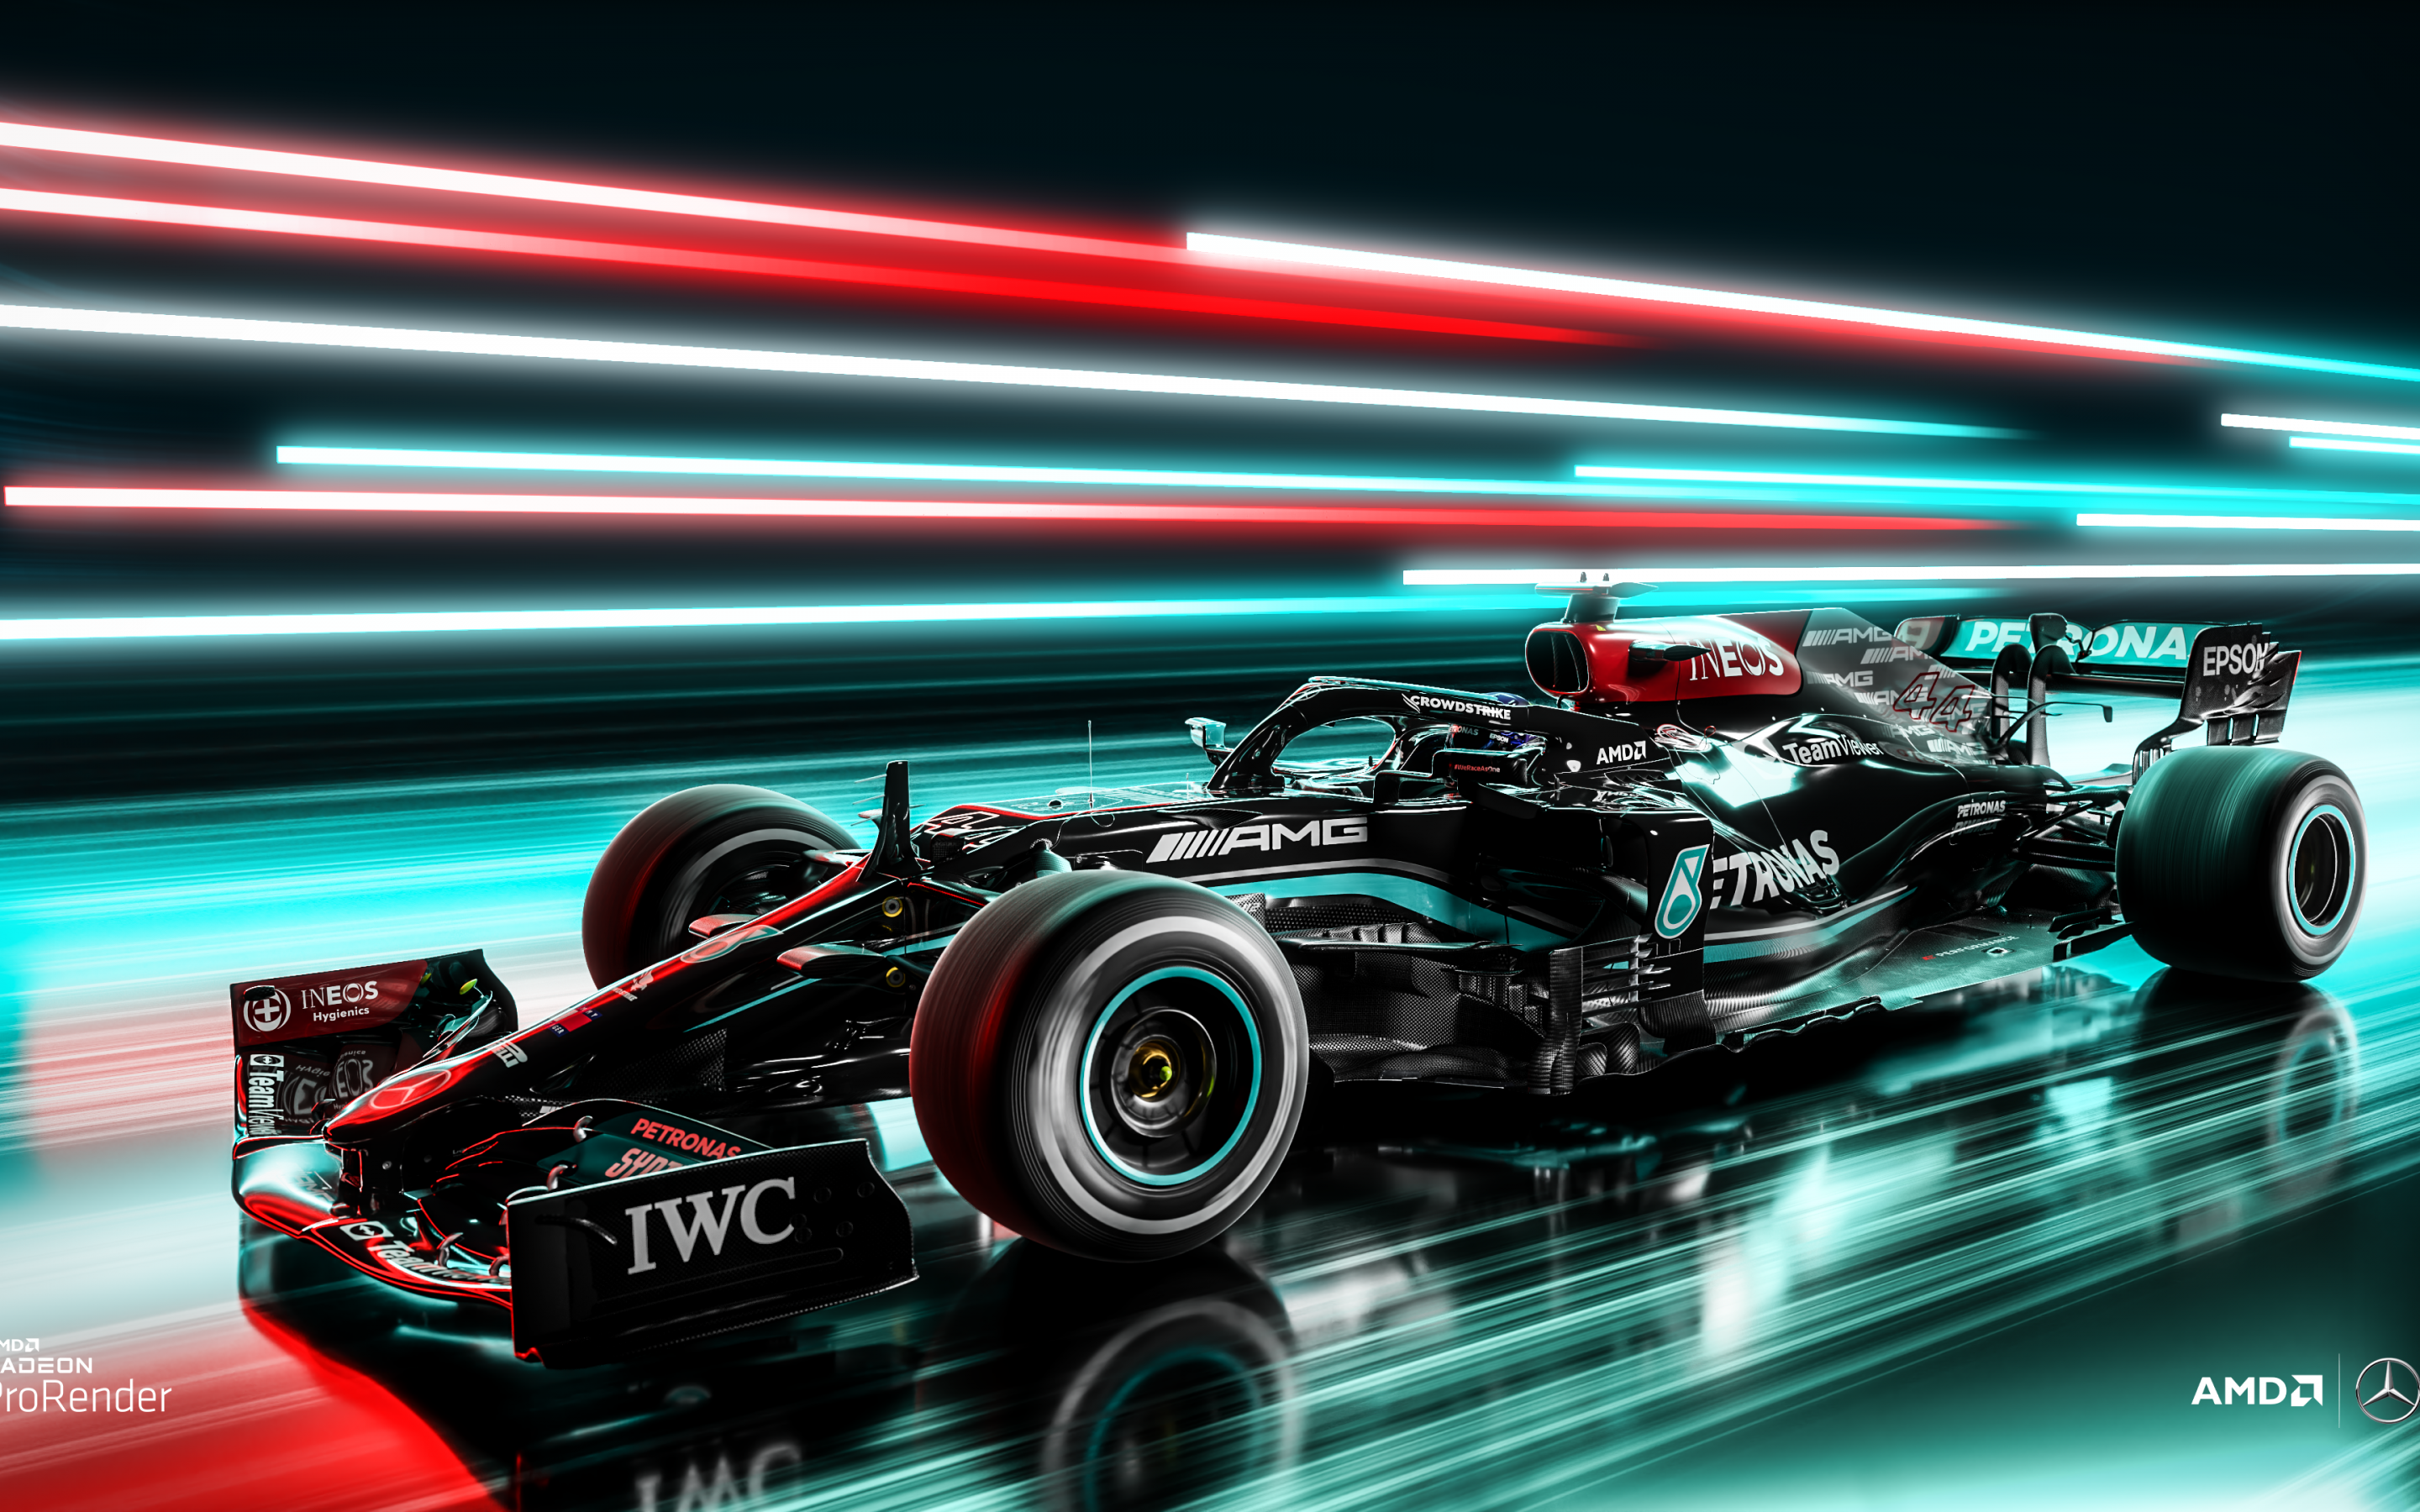 Download wallpapers 4k, Mercedes W13, vector art, George Russell, 2022 F1  cars, Formula 1, George Russell drawing, Mercedes-AMG Petronas F1 Team, new  W13, F1, Mercedes-AMG Petronas F1 Team 2022, F1 cars, George